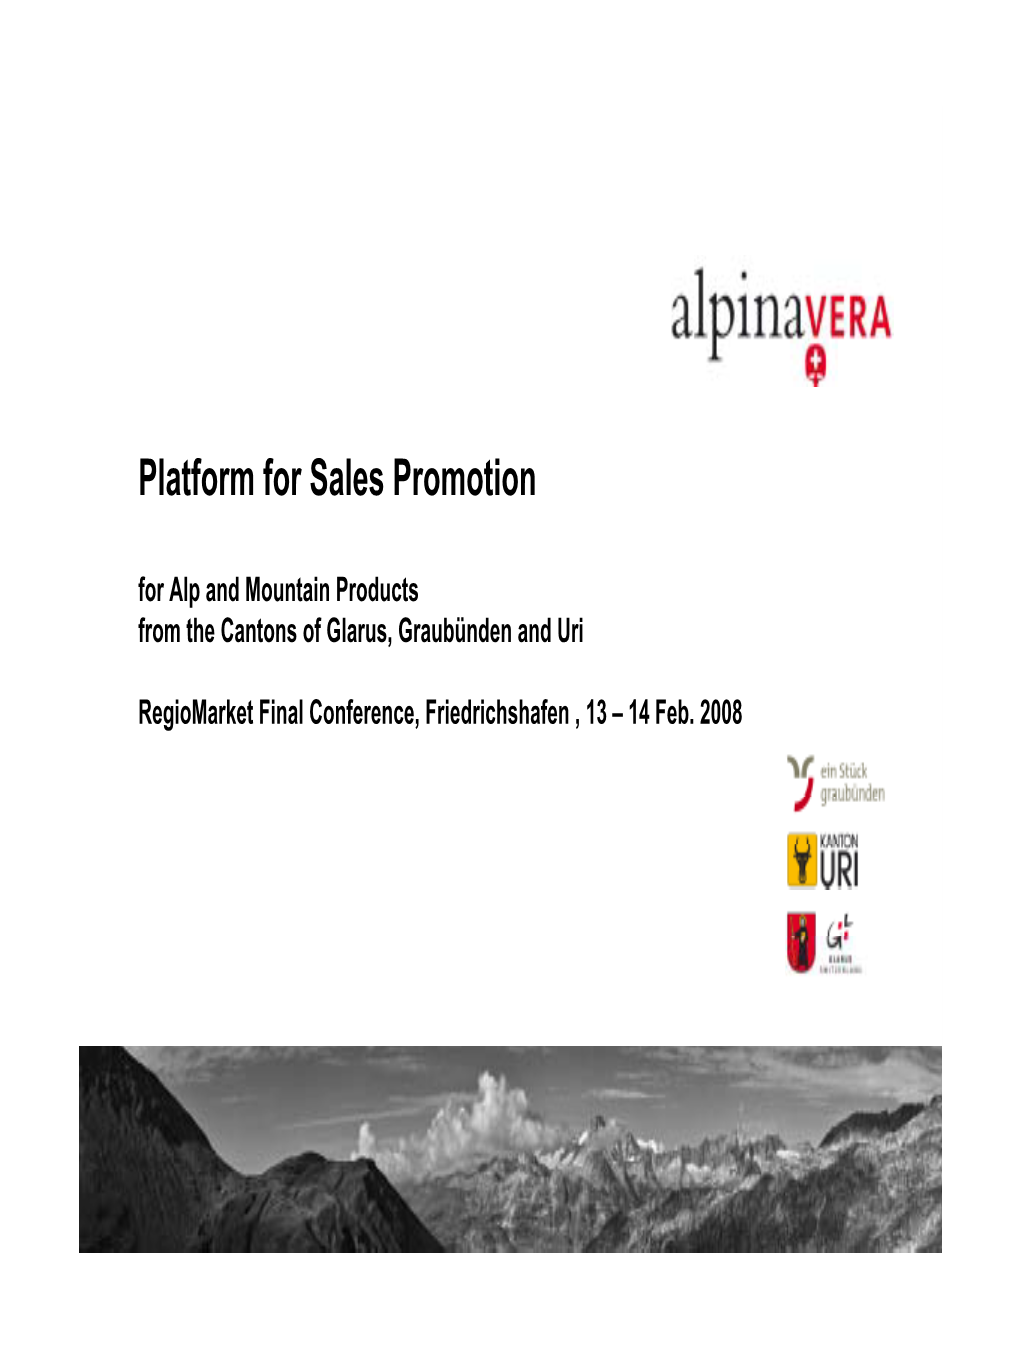 Platform for Sales Promotion for Alp and Mountain Products from the Cantons of Glarus, Graubünden and Uri